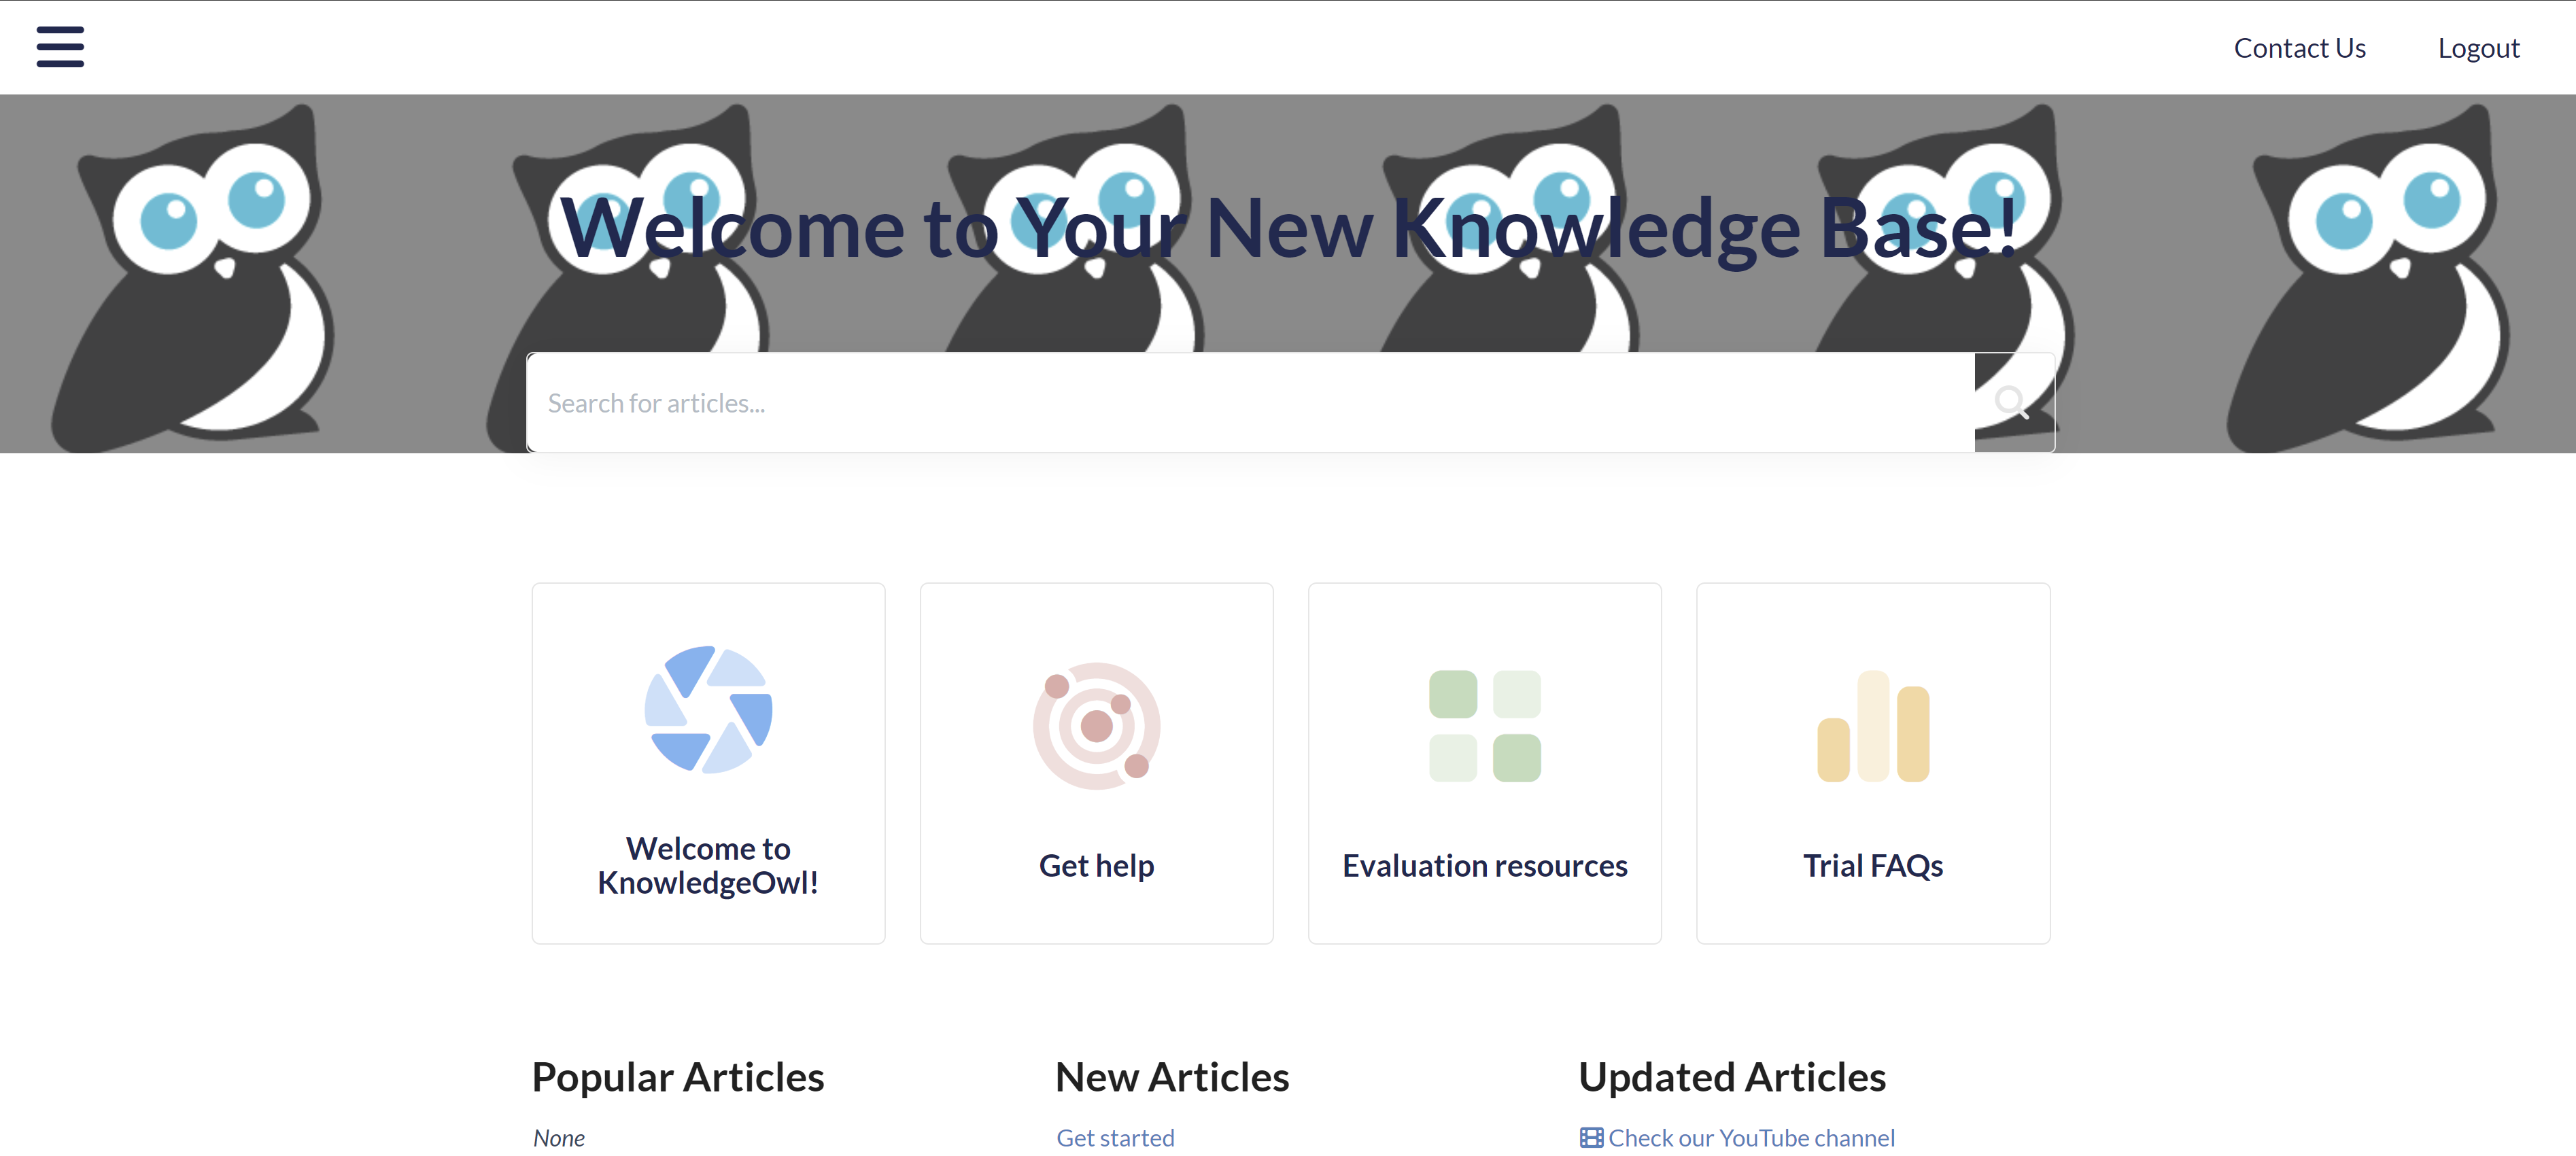 The homepage of a knowledge base. An image of Linus, the KnowledgeOwl mascot, repeats six times across the top of the page.